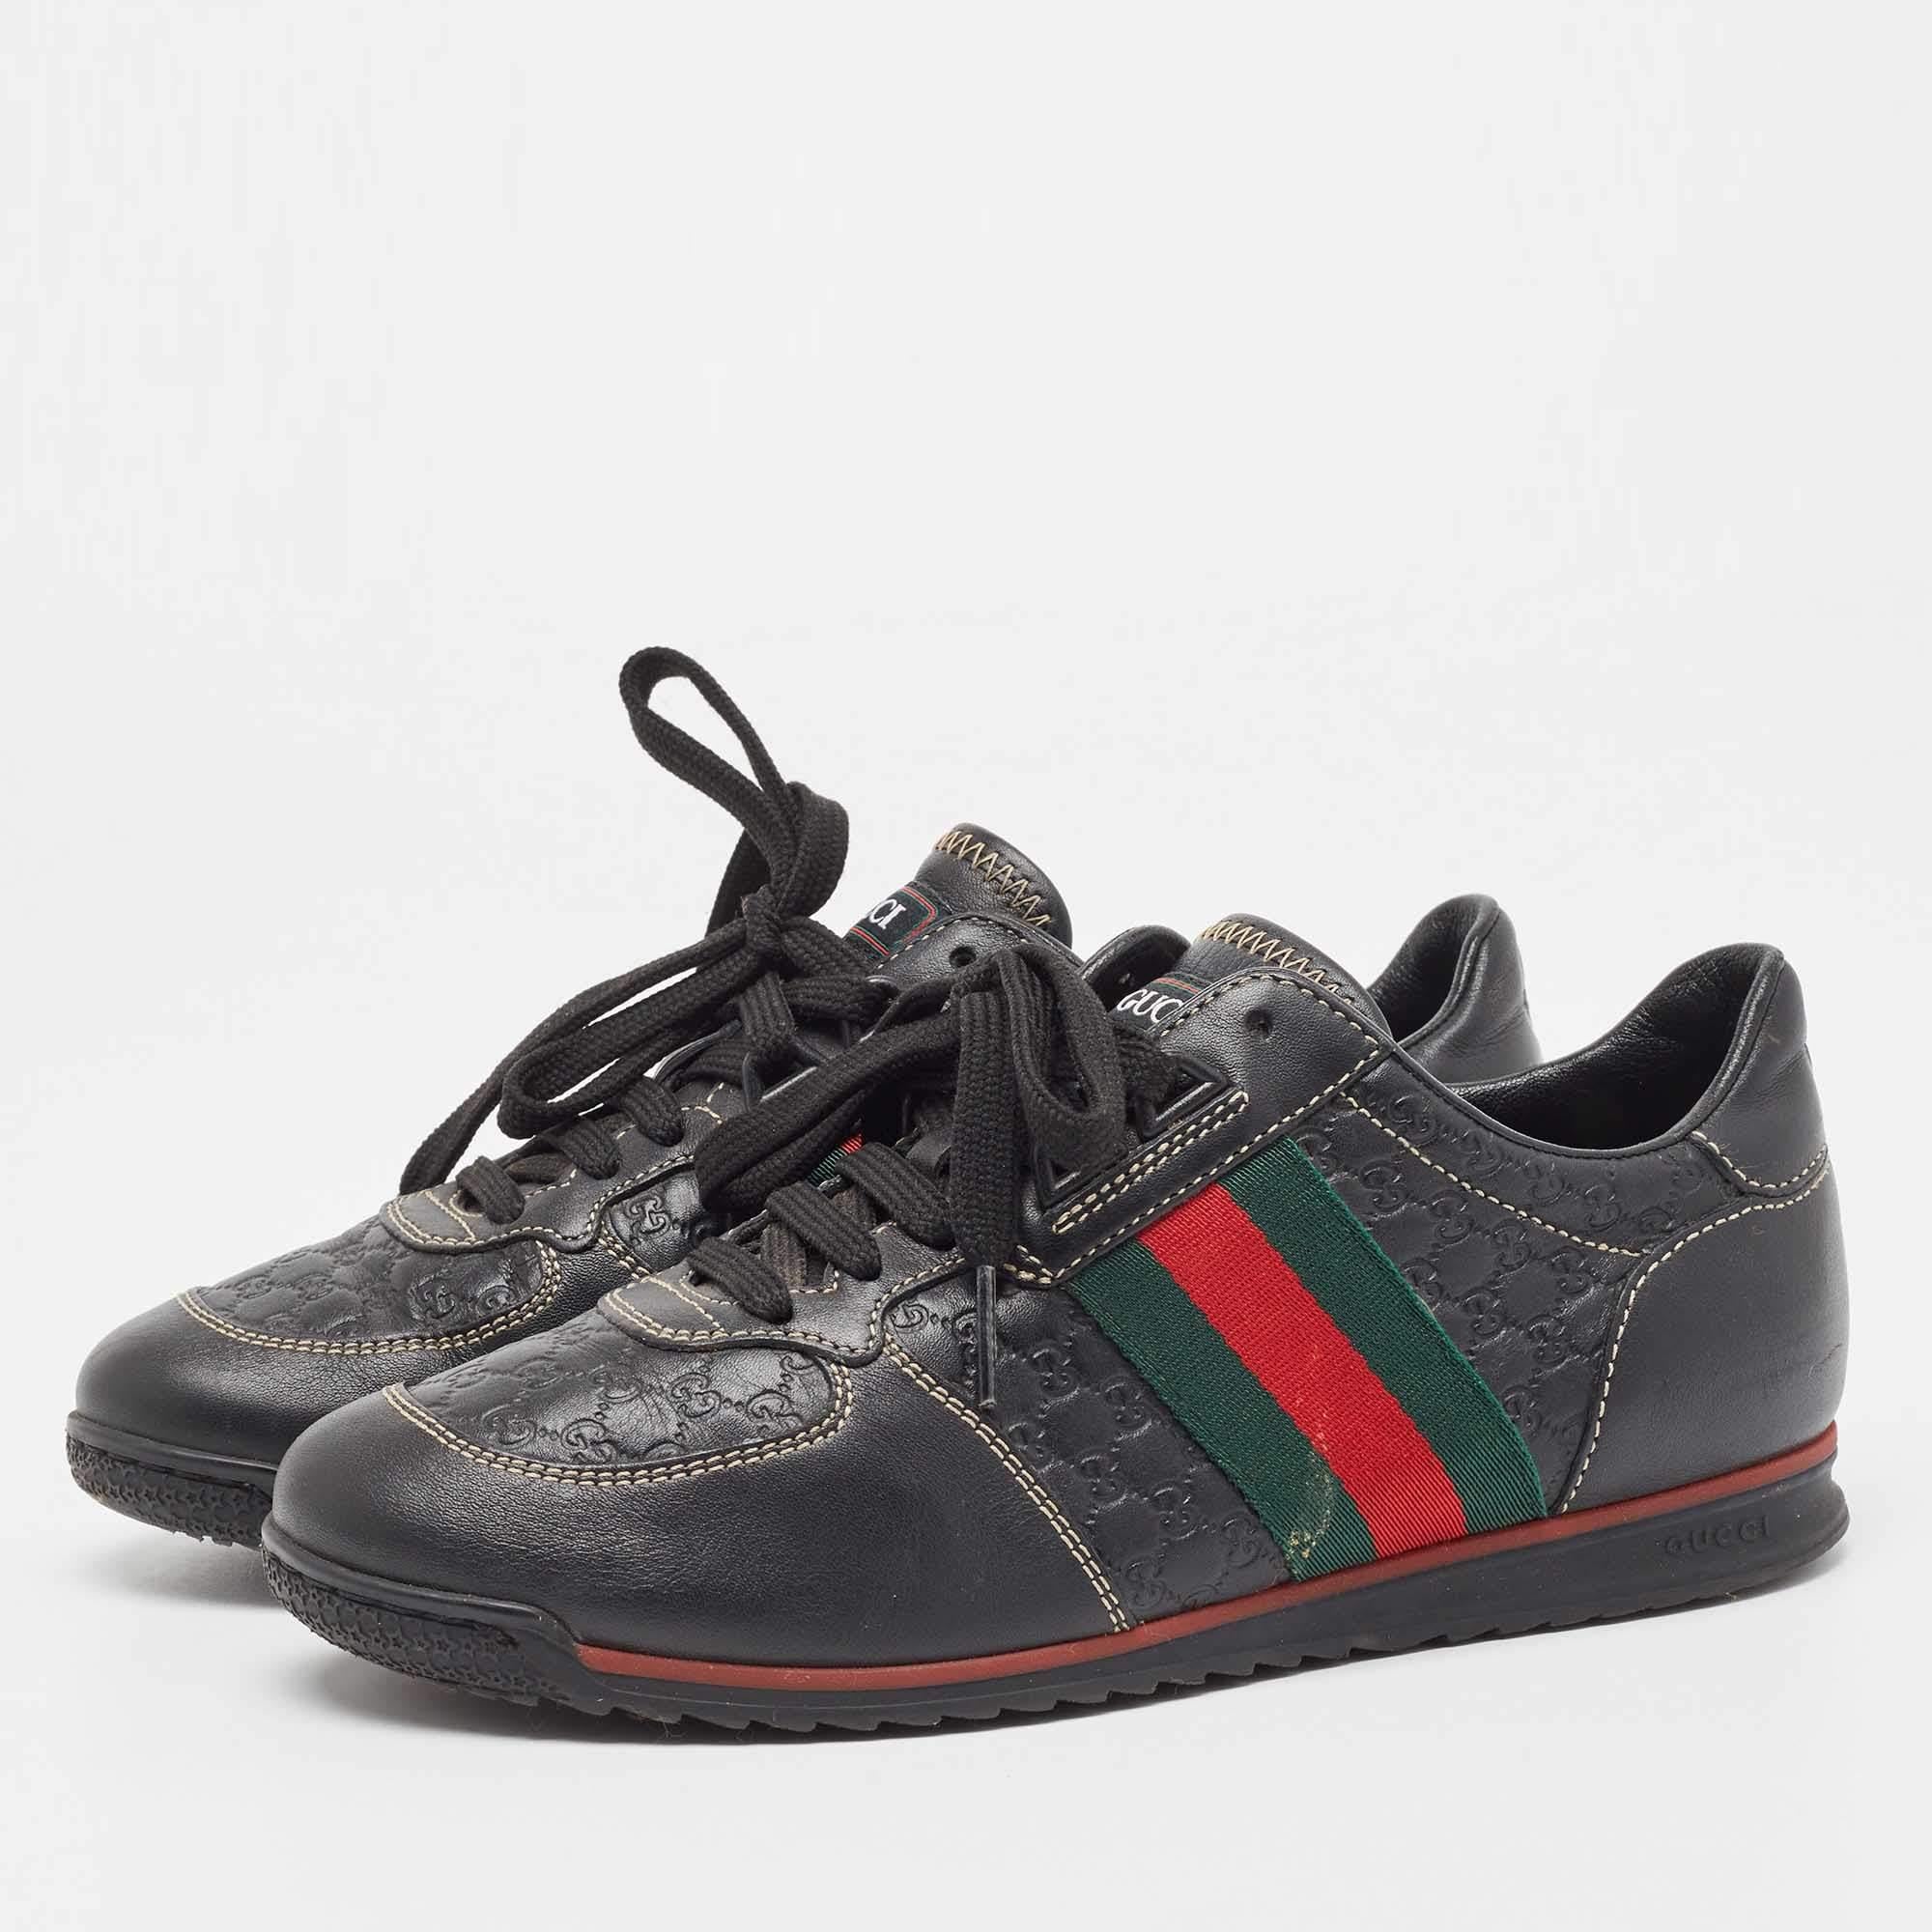 These black sneakers from Gucci offer the best of comfort. They are designed in a low-top profile and are perfect to be worn all day.

